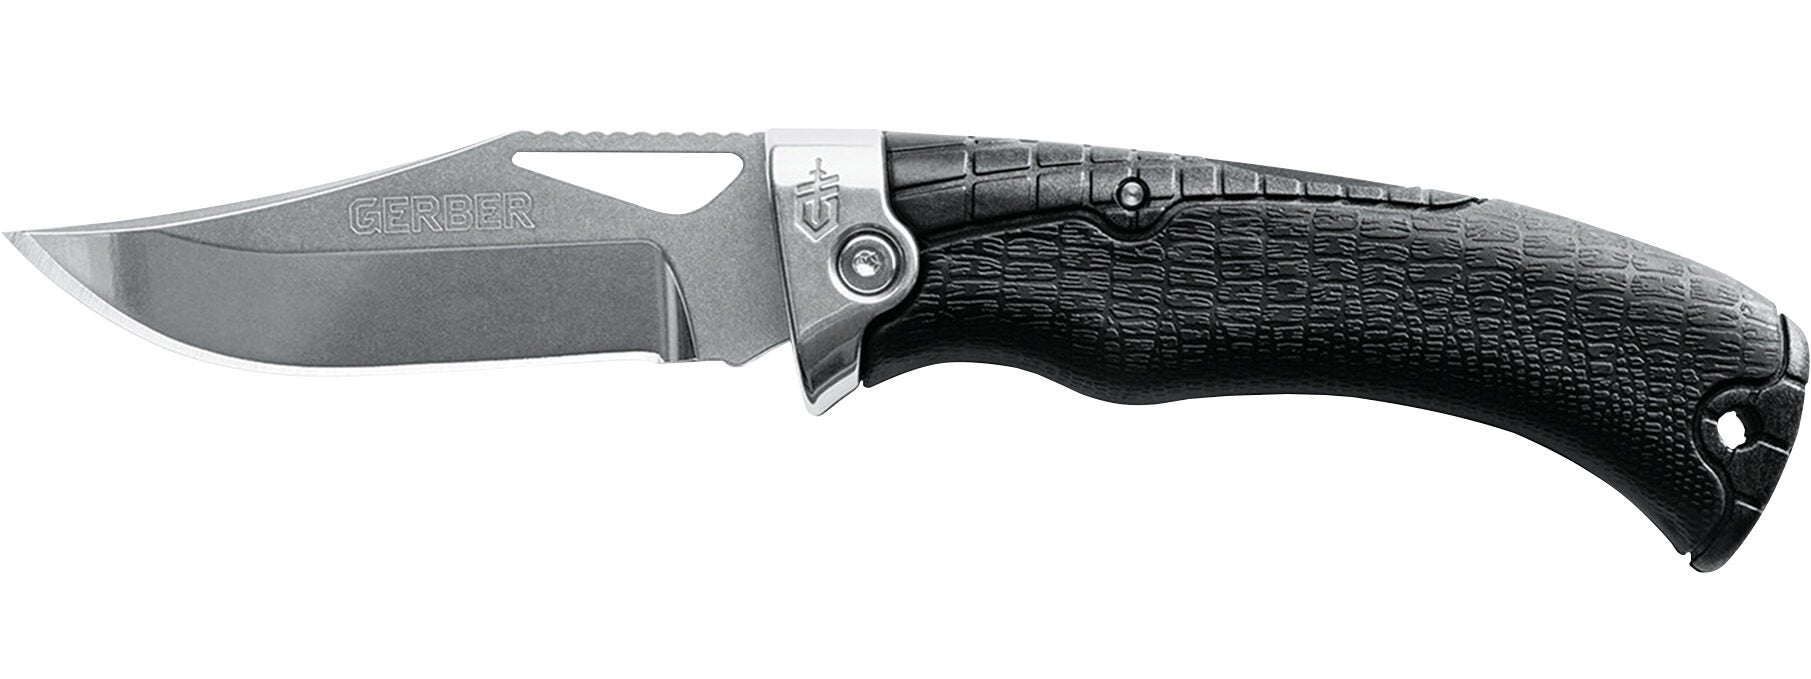 Knife with a clip point blade